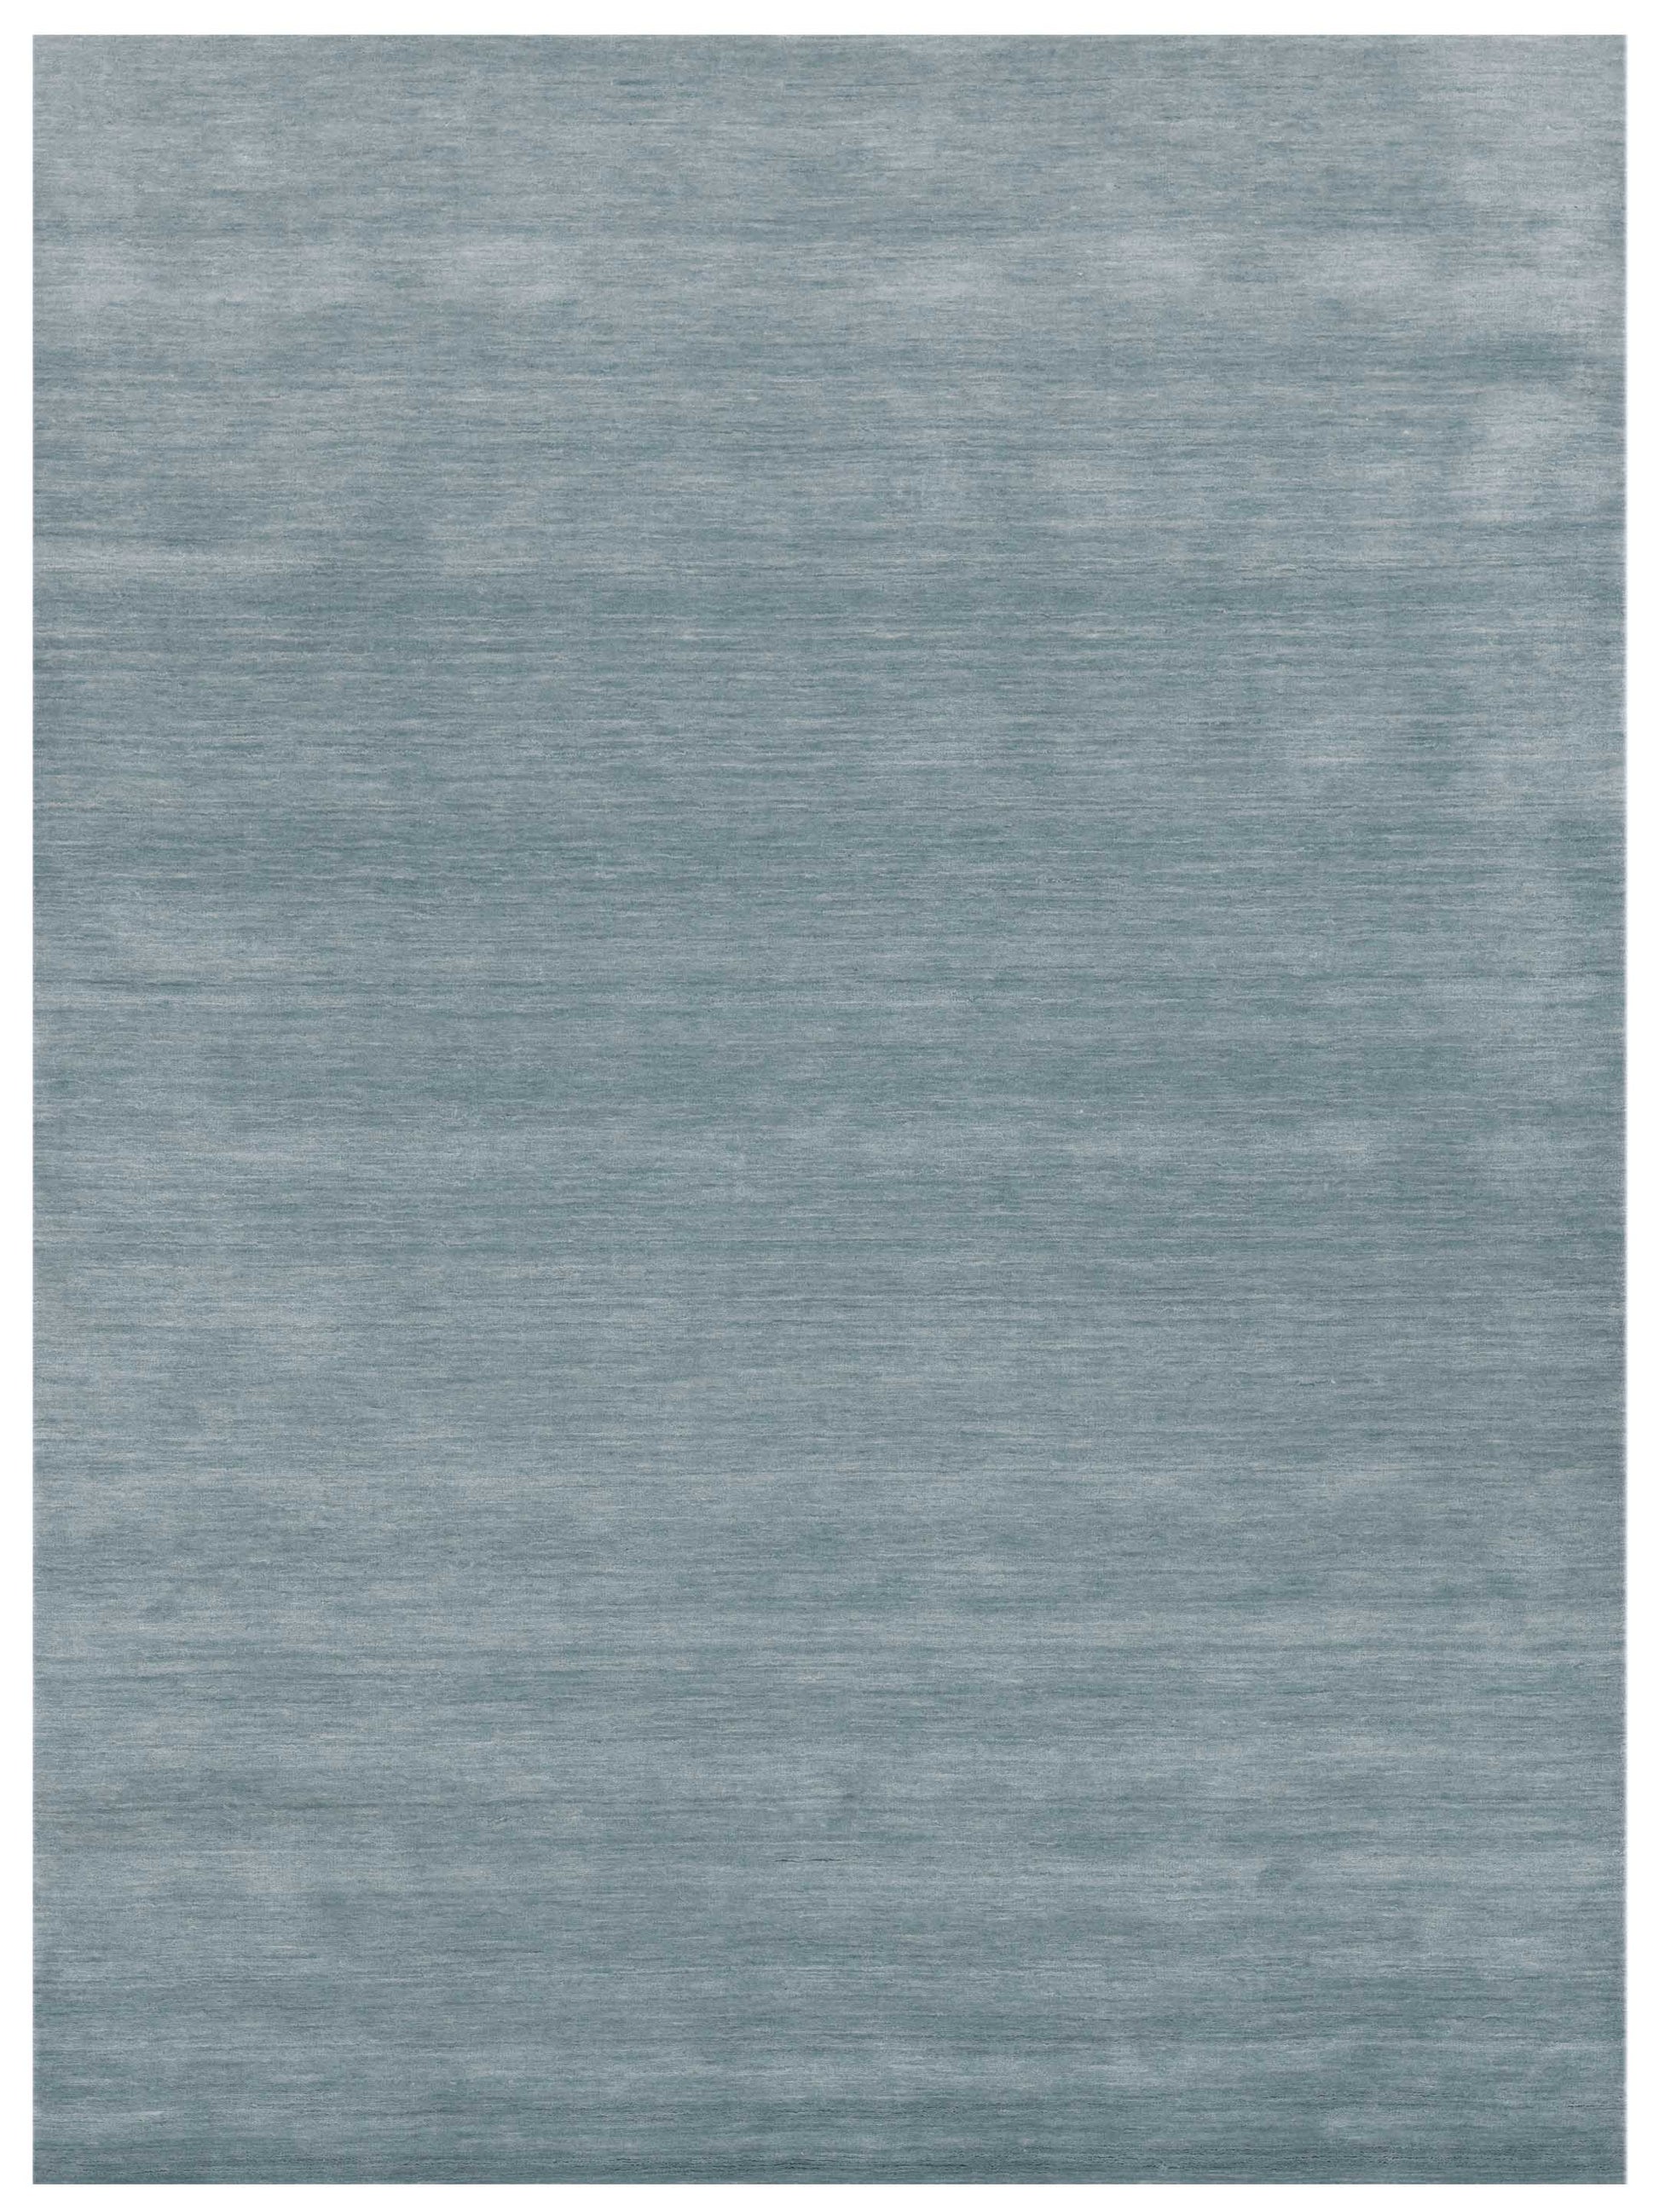 Limited ARMIDALE ARM-304 POLO BLUE Transitional Woven Rug